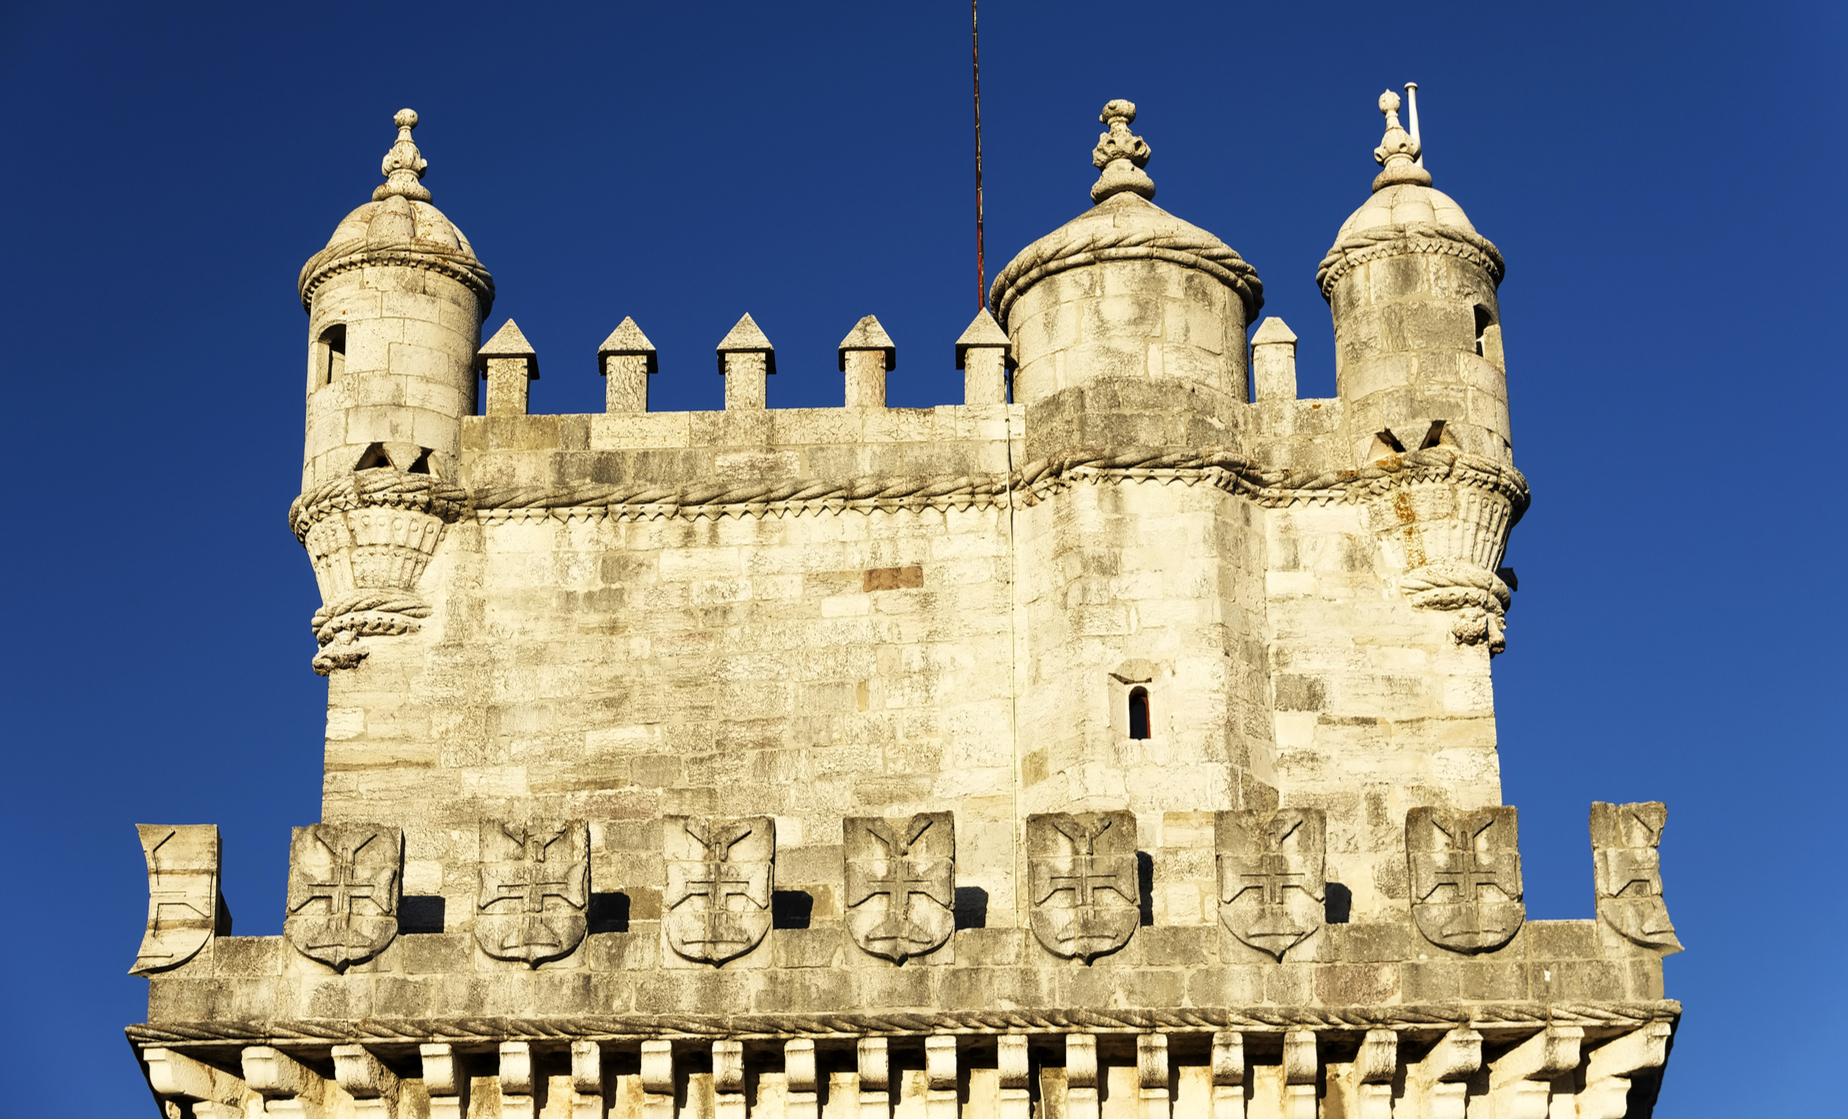 Full Day Lisbon and Sintra Tour (Church of S. Jerome Monastery, Trade Square, Rossio Square)